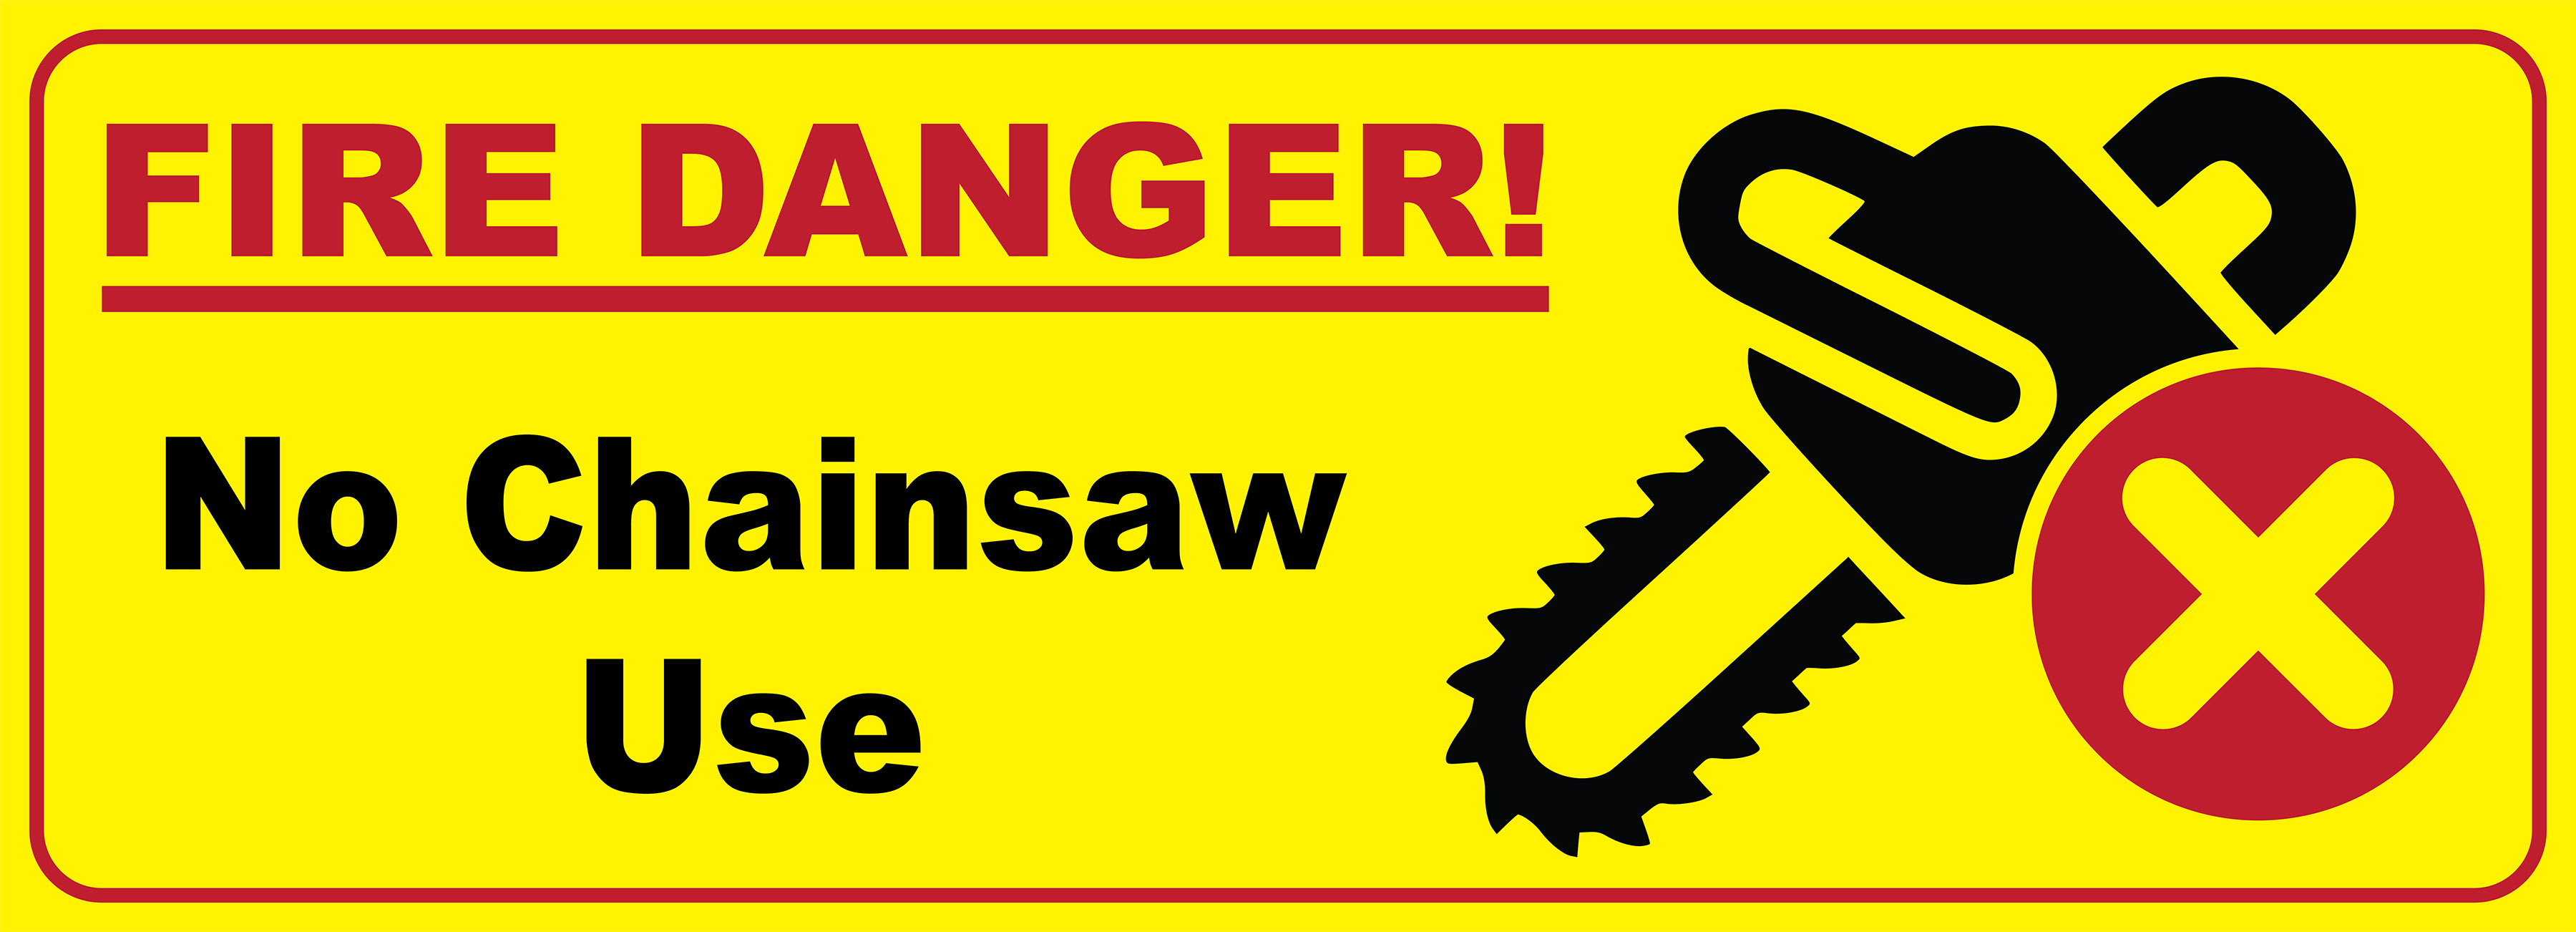 Bright yellow background with red border; "Fire Danger" text; chainsaw icon with red X in circle; "No chainsaw use" text